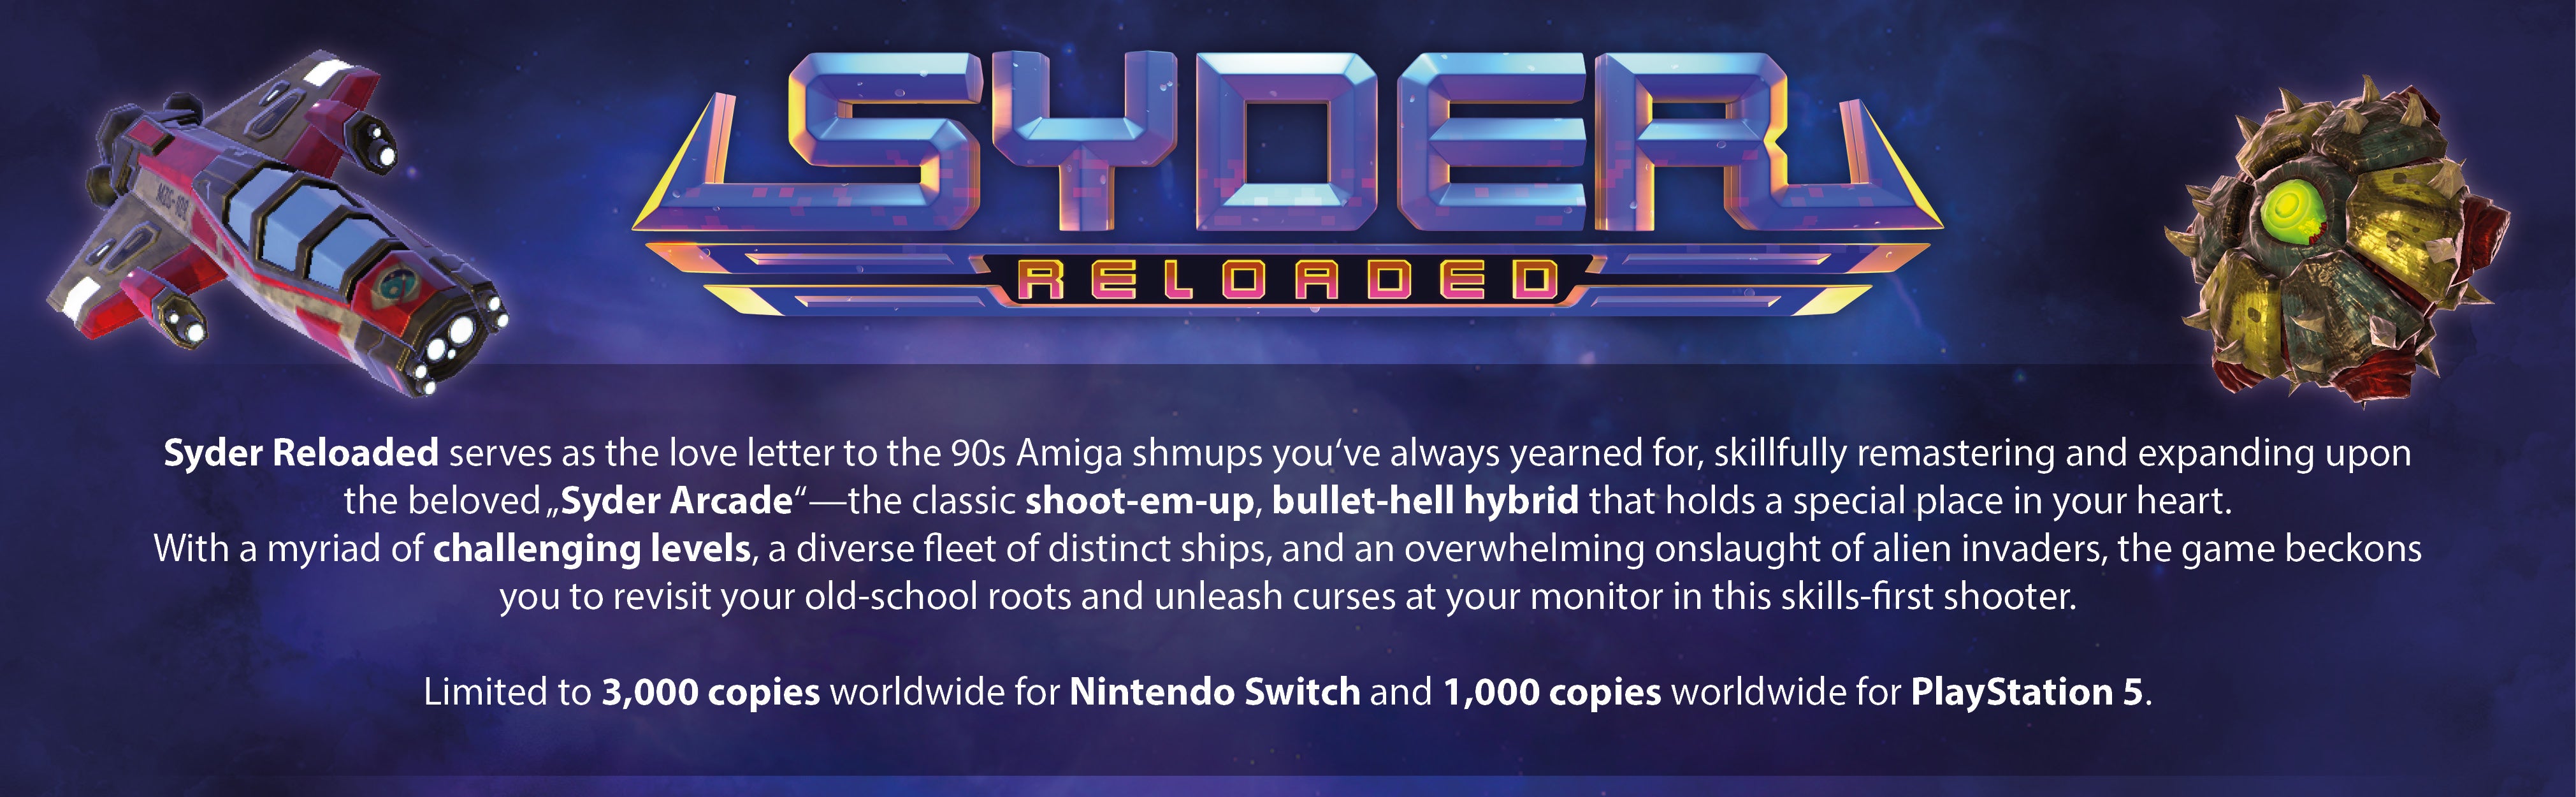 Syder Reloaded Nintendo Switch Sony PlayStation 5 Physical Strictly Limited Editions